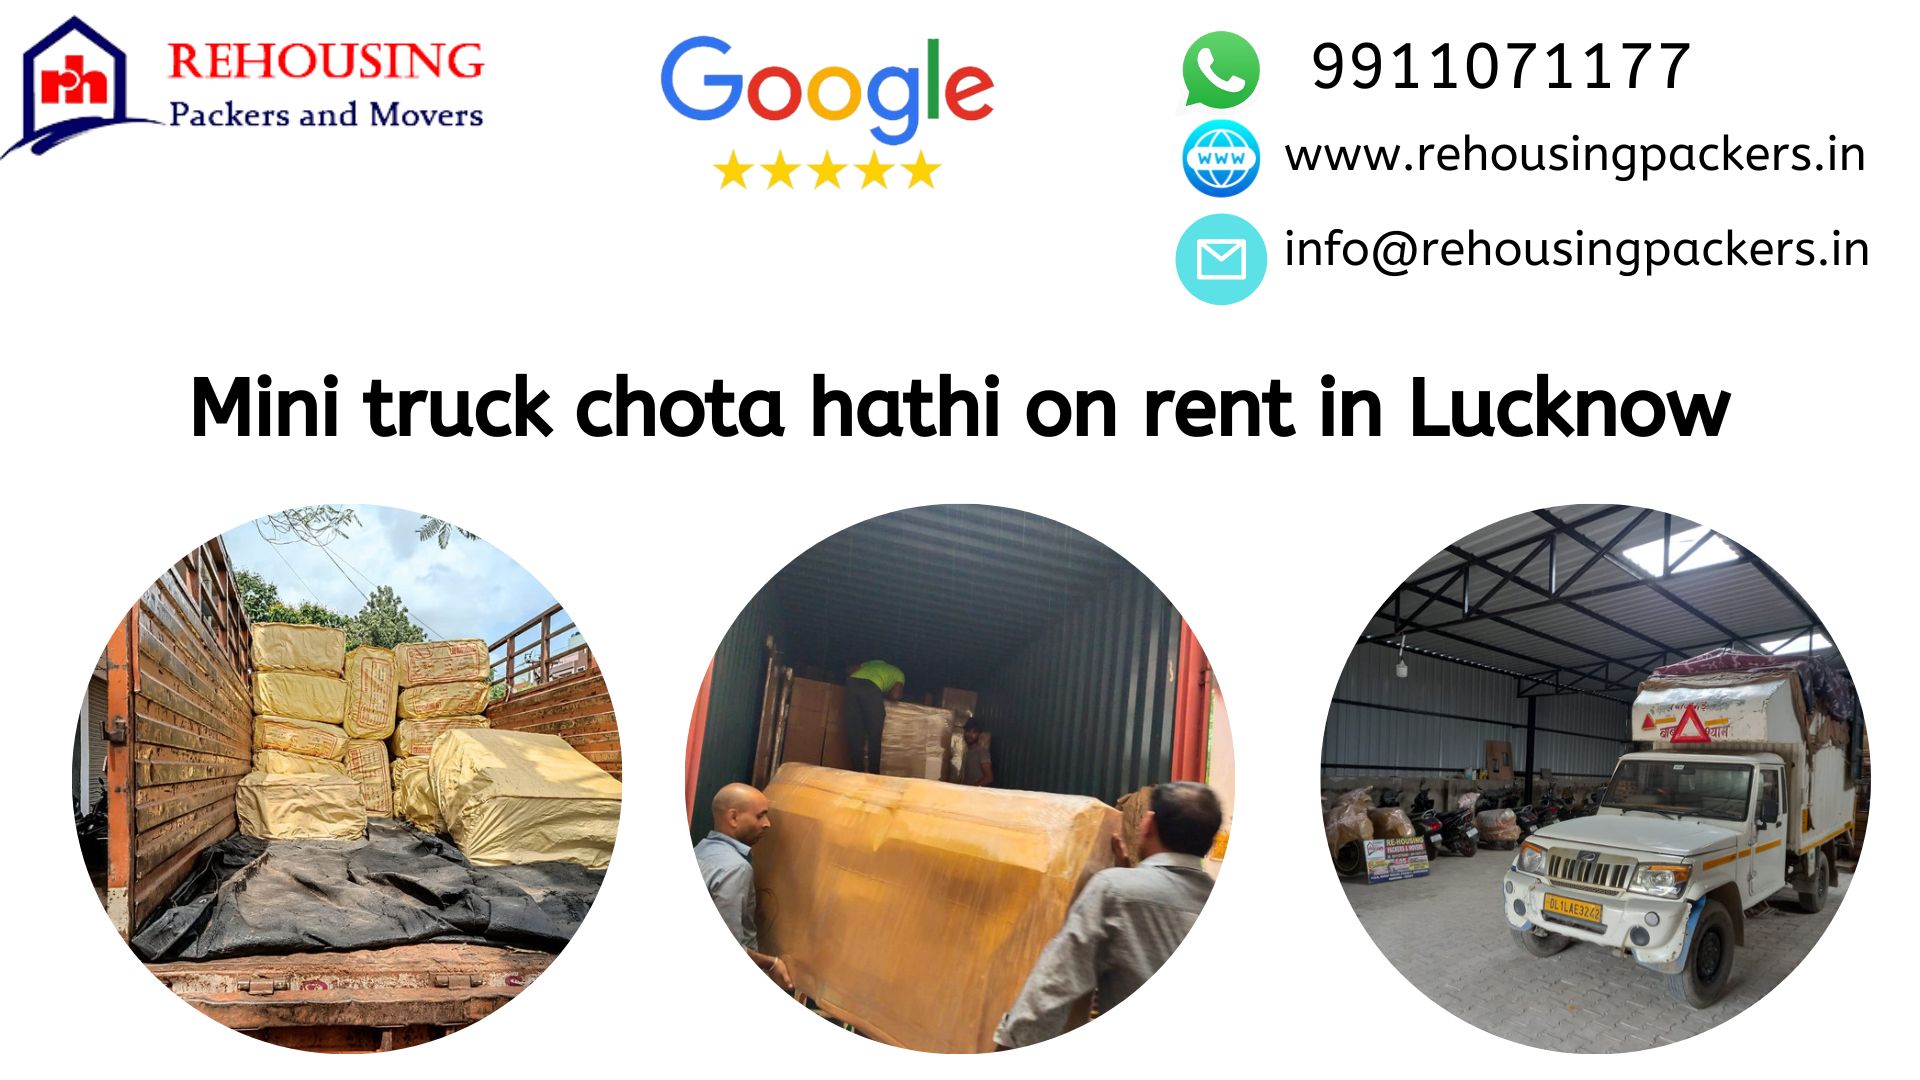 Chota Hathi on rent in Lucknow | Rehousing packers